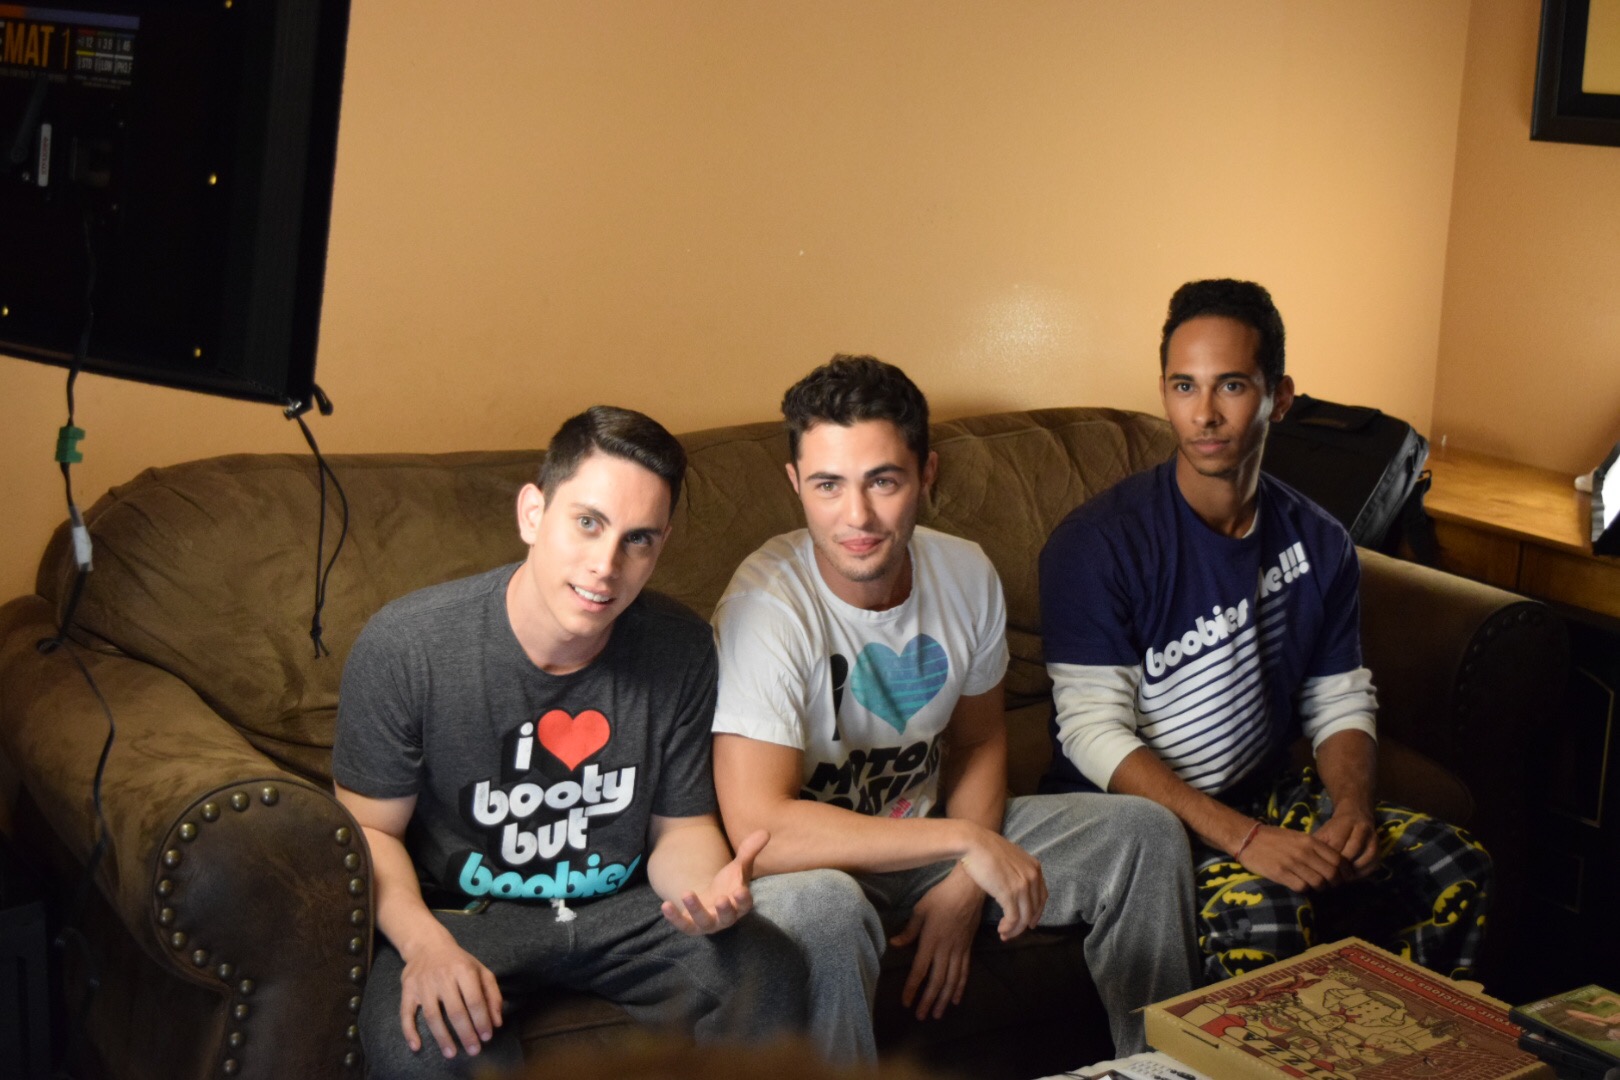 Tyler Honigsfeld on the set of Slumber Party with Darren Barnet (middle) and Drake Ford (right).